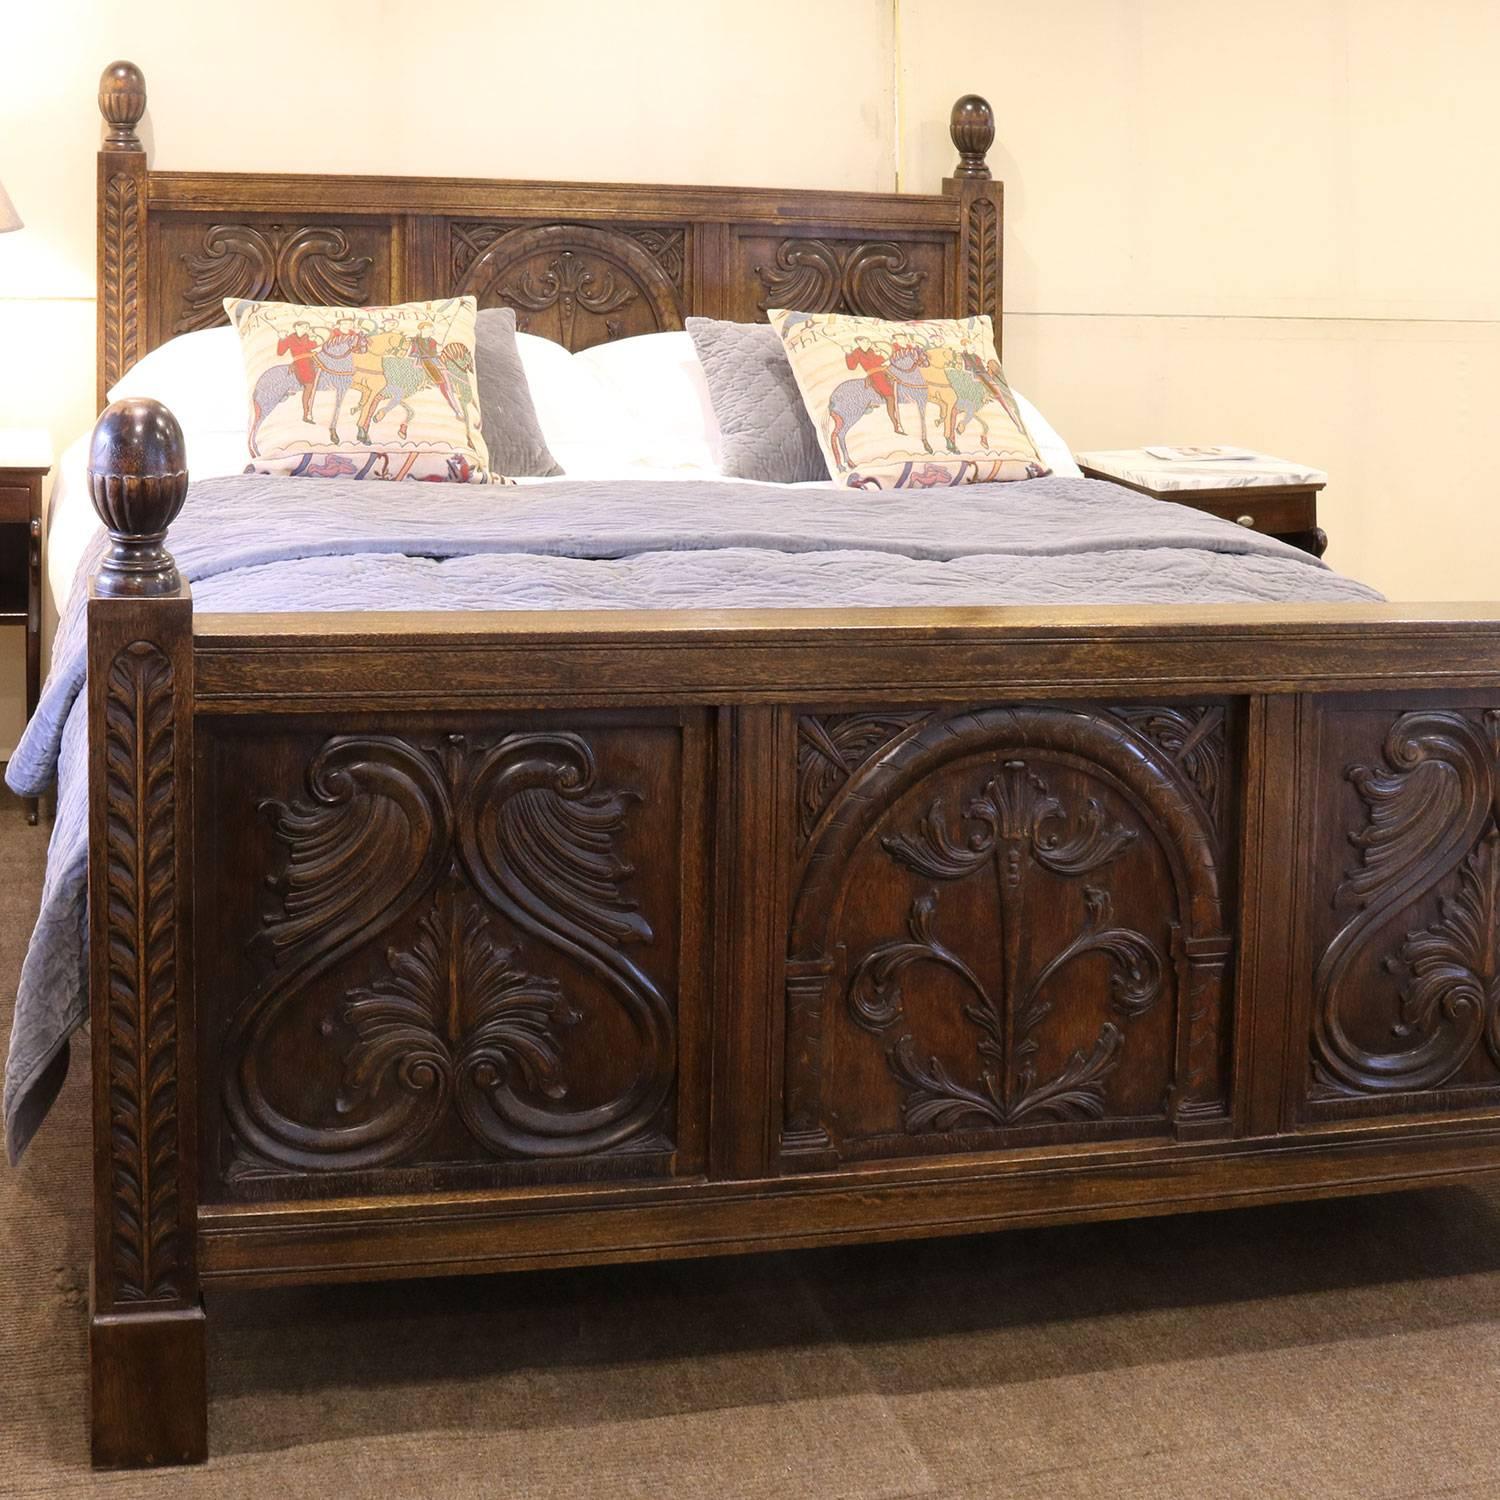 A wide Jacobean style bed with carved panels and acorn finials.

This bed accepts a 72 inch wide (6ft or 180cm) British super king-size or Californian king-size base and mattress set.

The price is for the bed frame alone. The base, mattress,